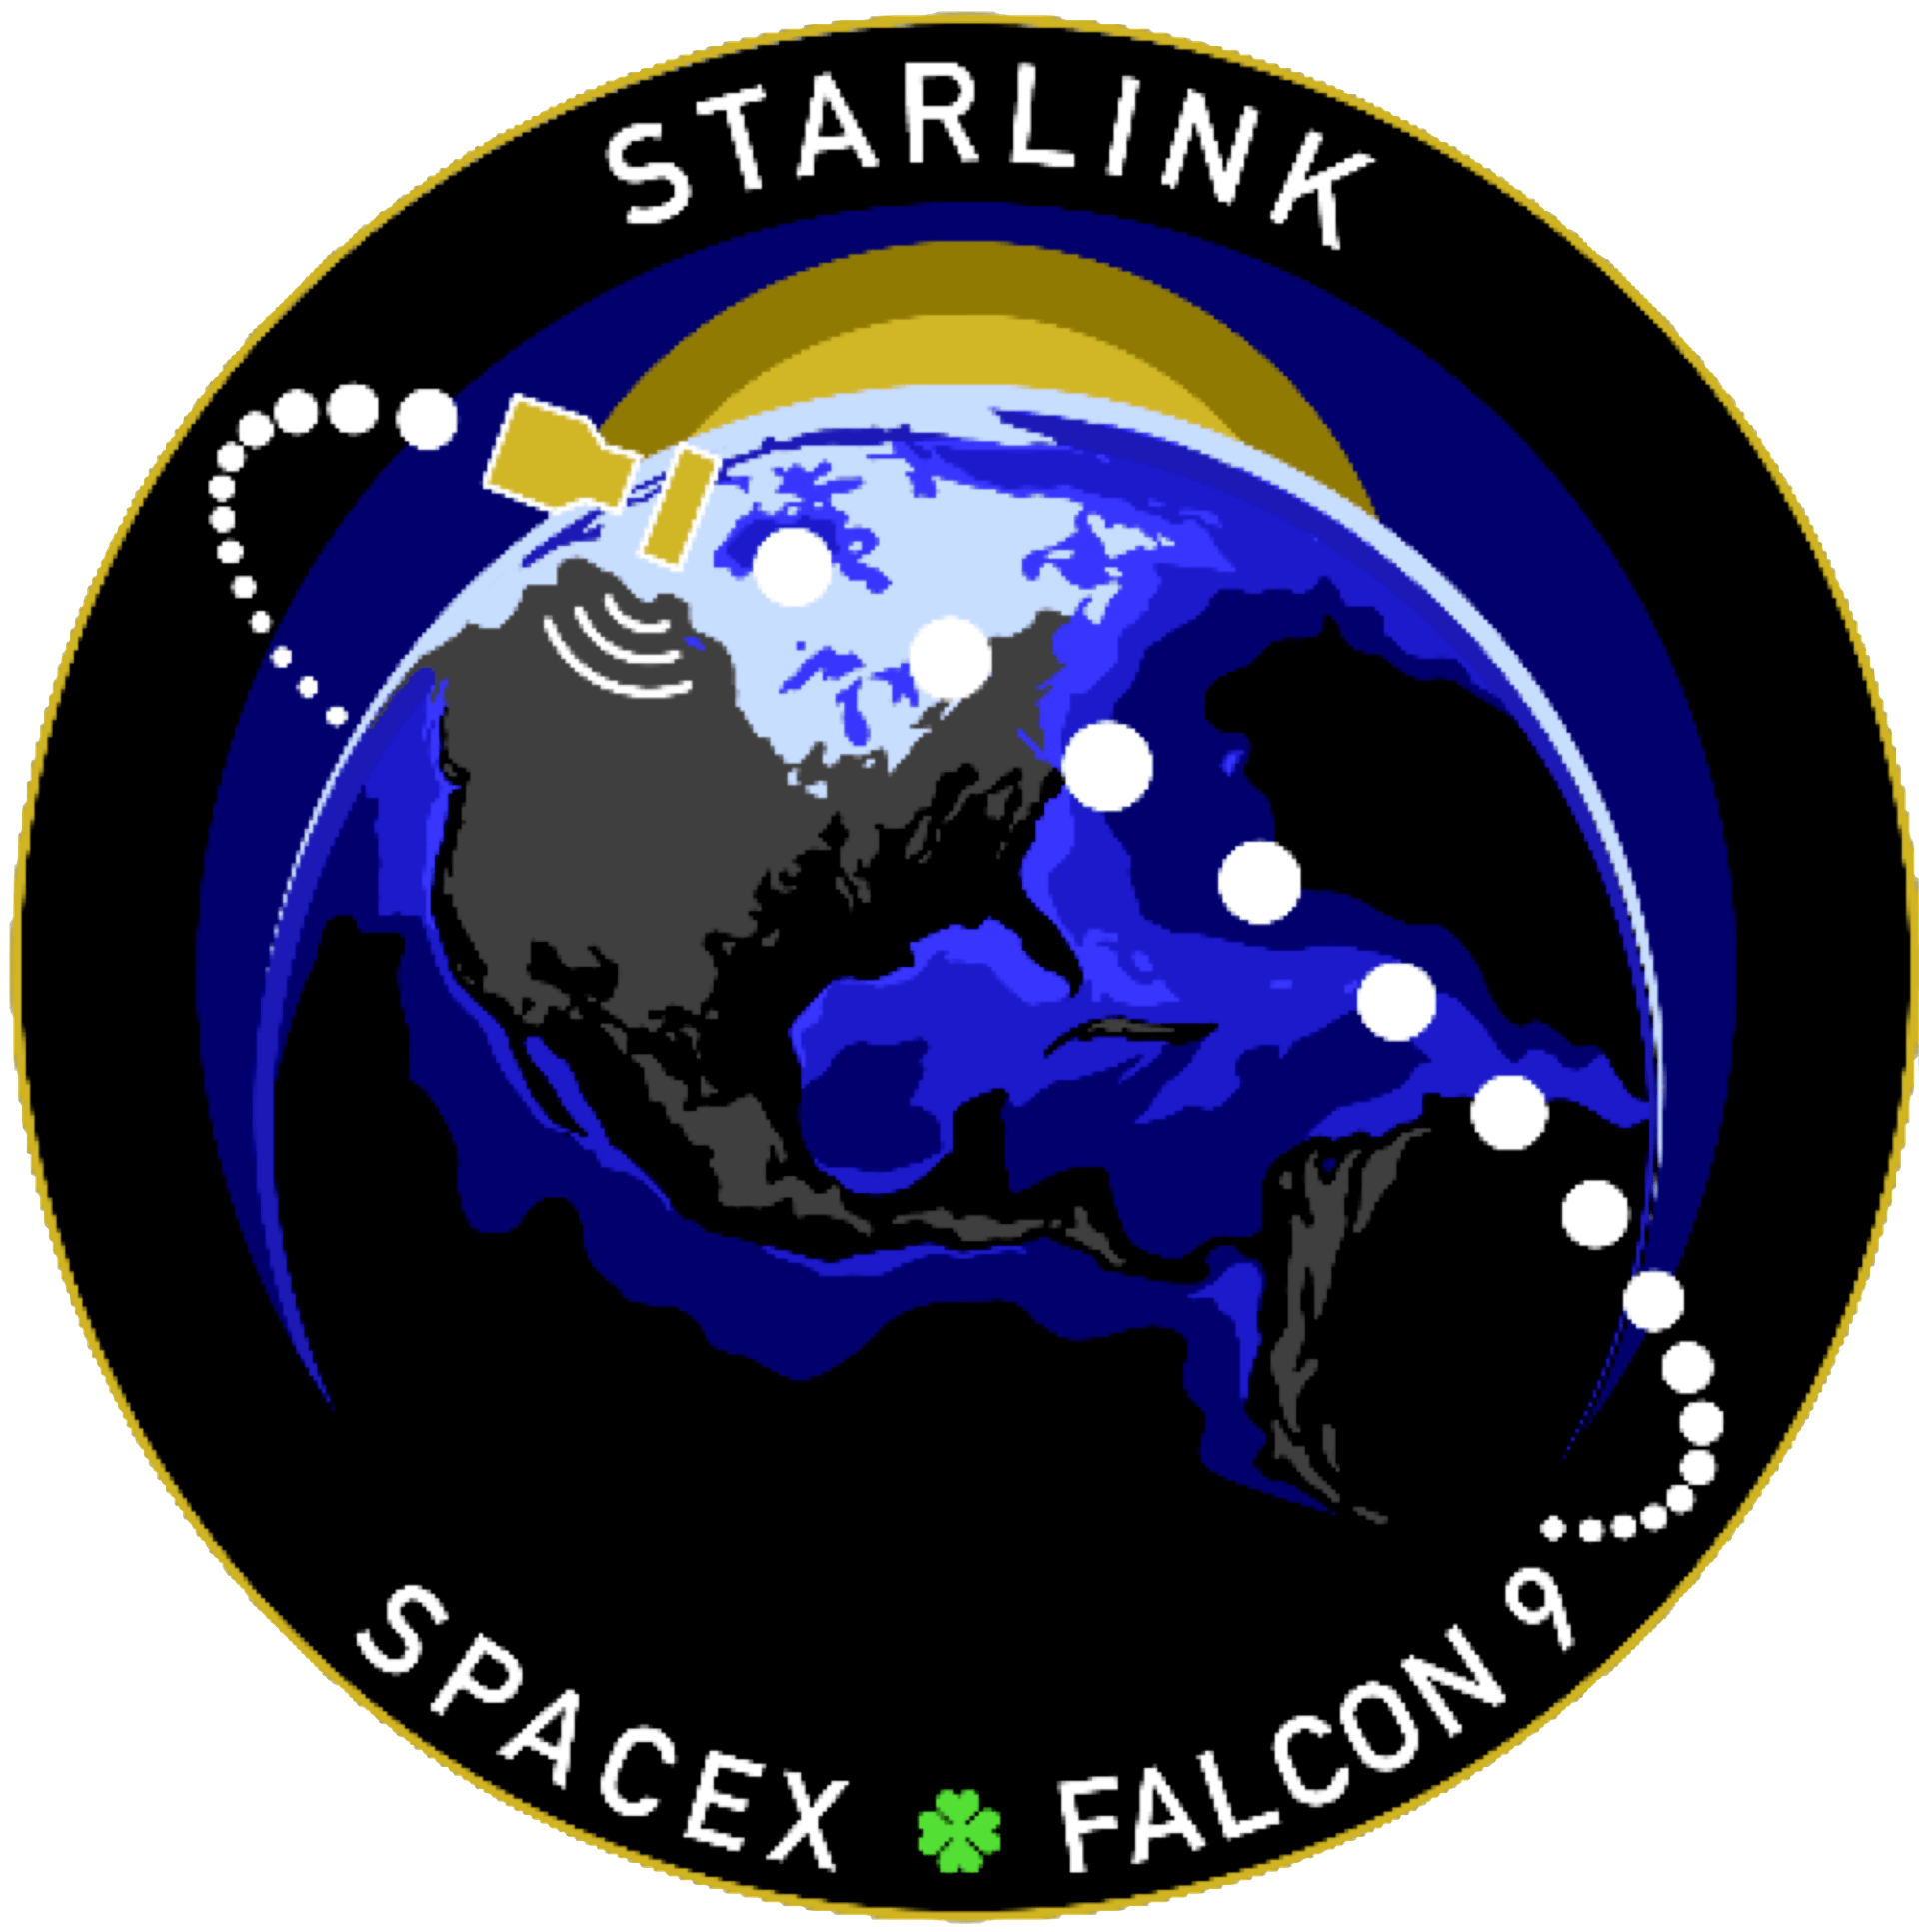 Mission patch for Starlink Group 4-26